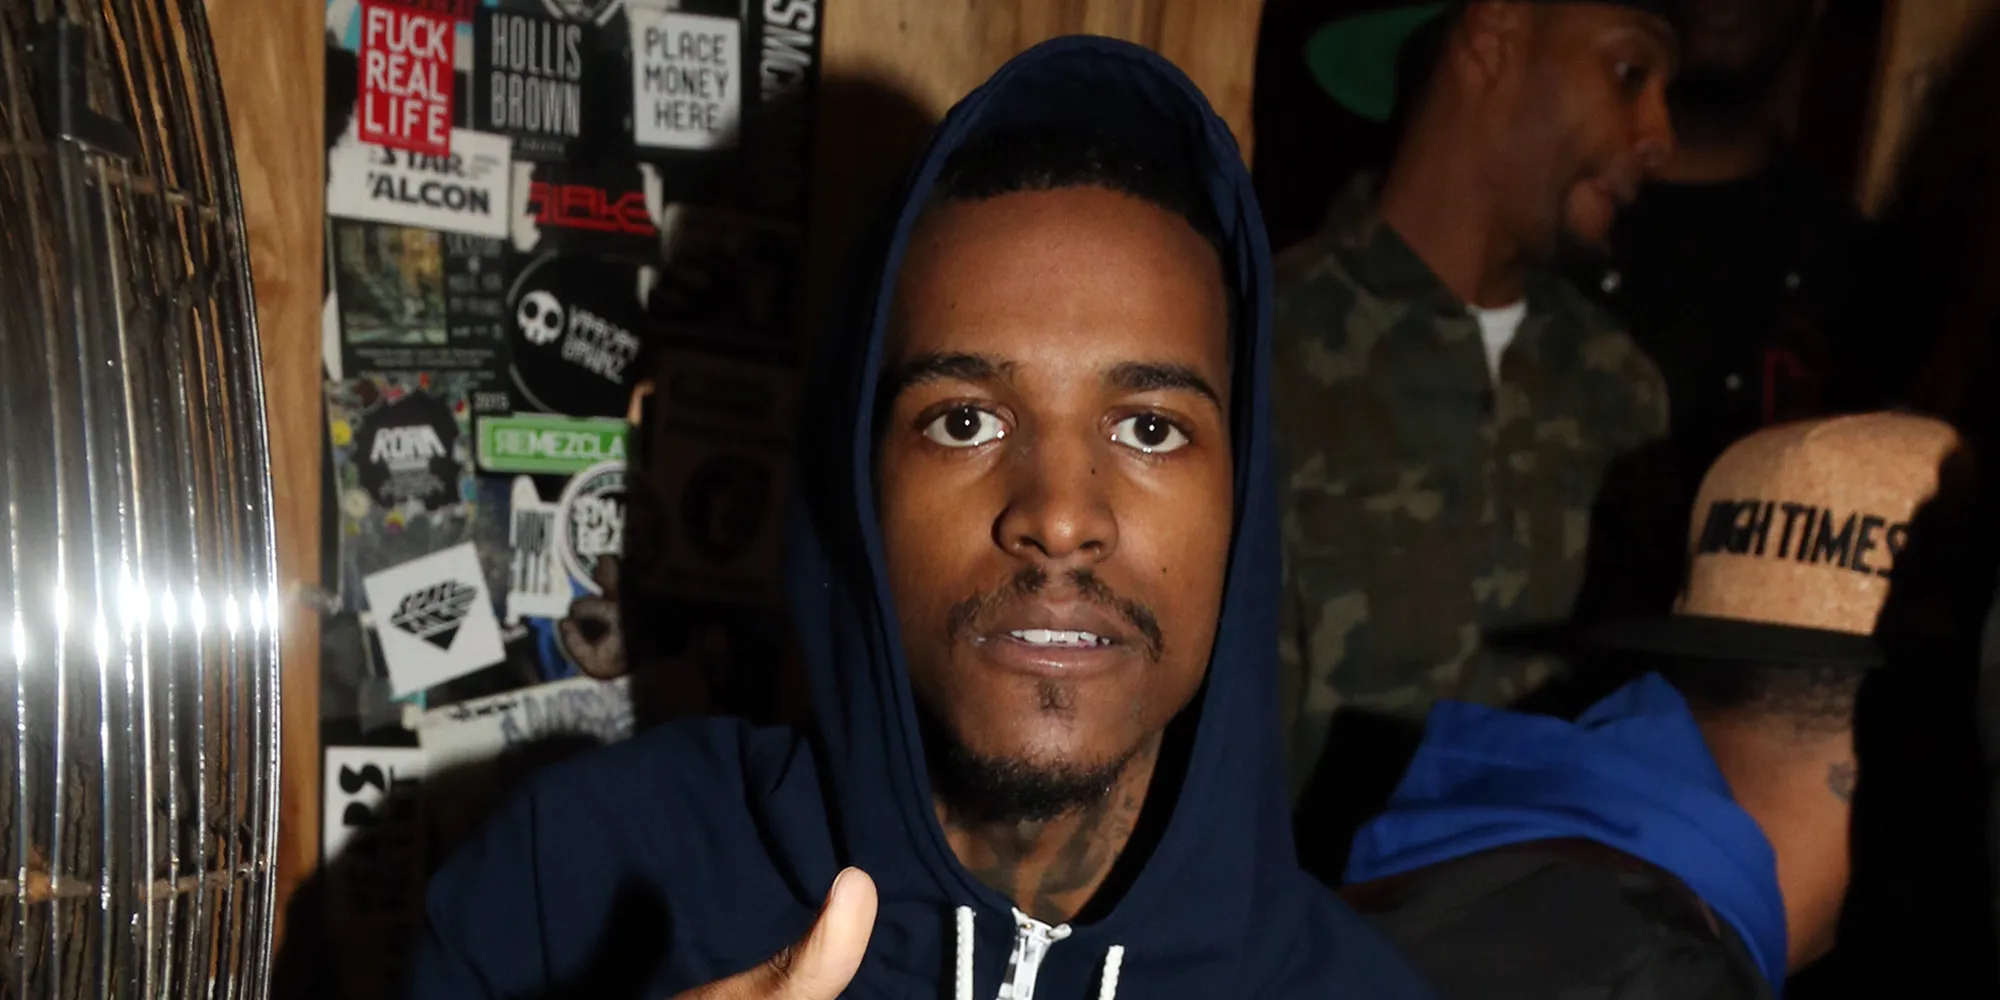 After being detained for aggravated assault against a family member, Lil Reese was taken to a jail in Texas